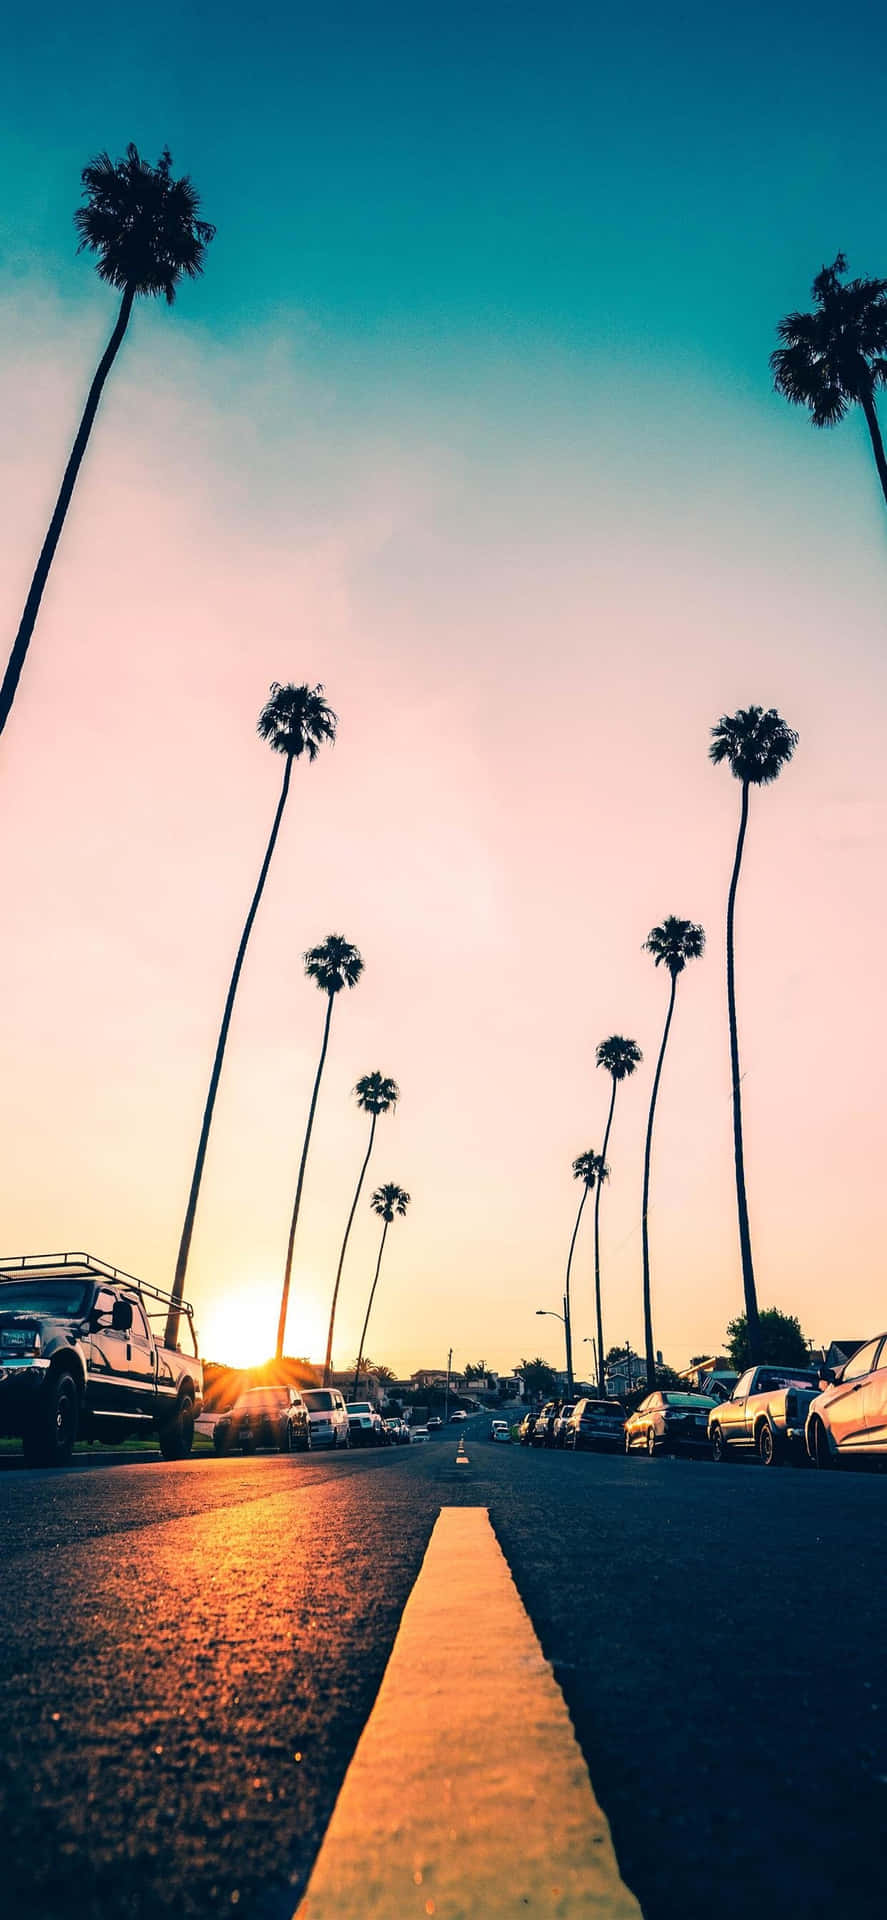 Get Ready for Summer with the Trendy Summer Iphone Wallpaper